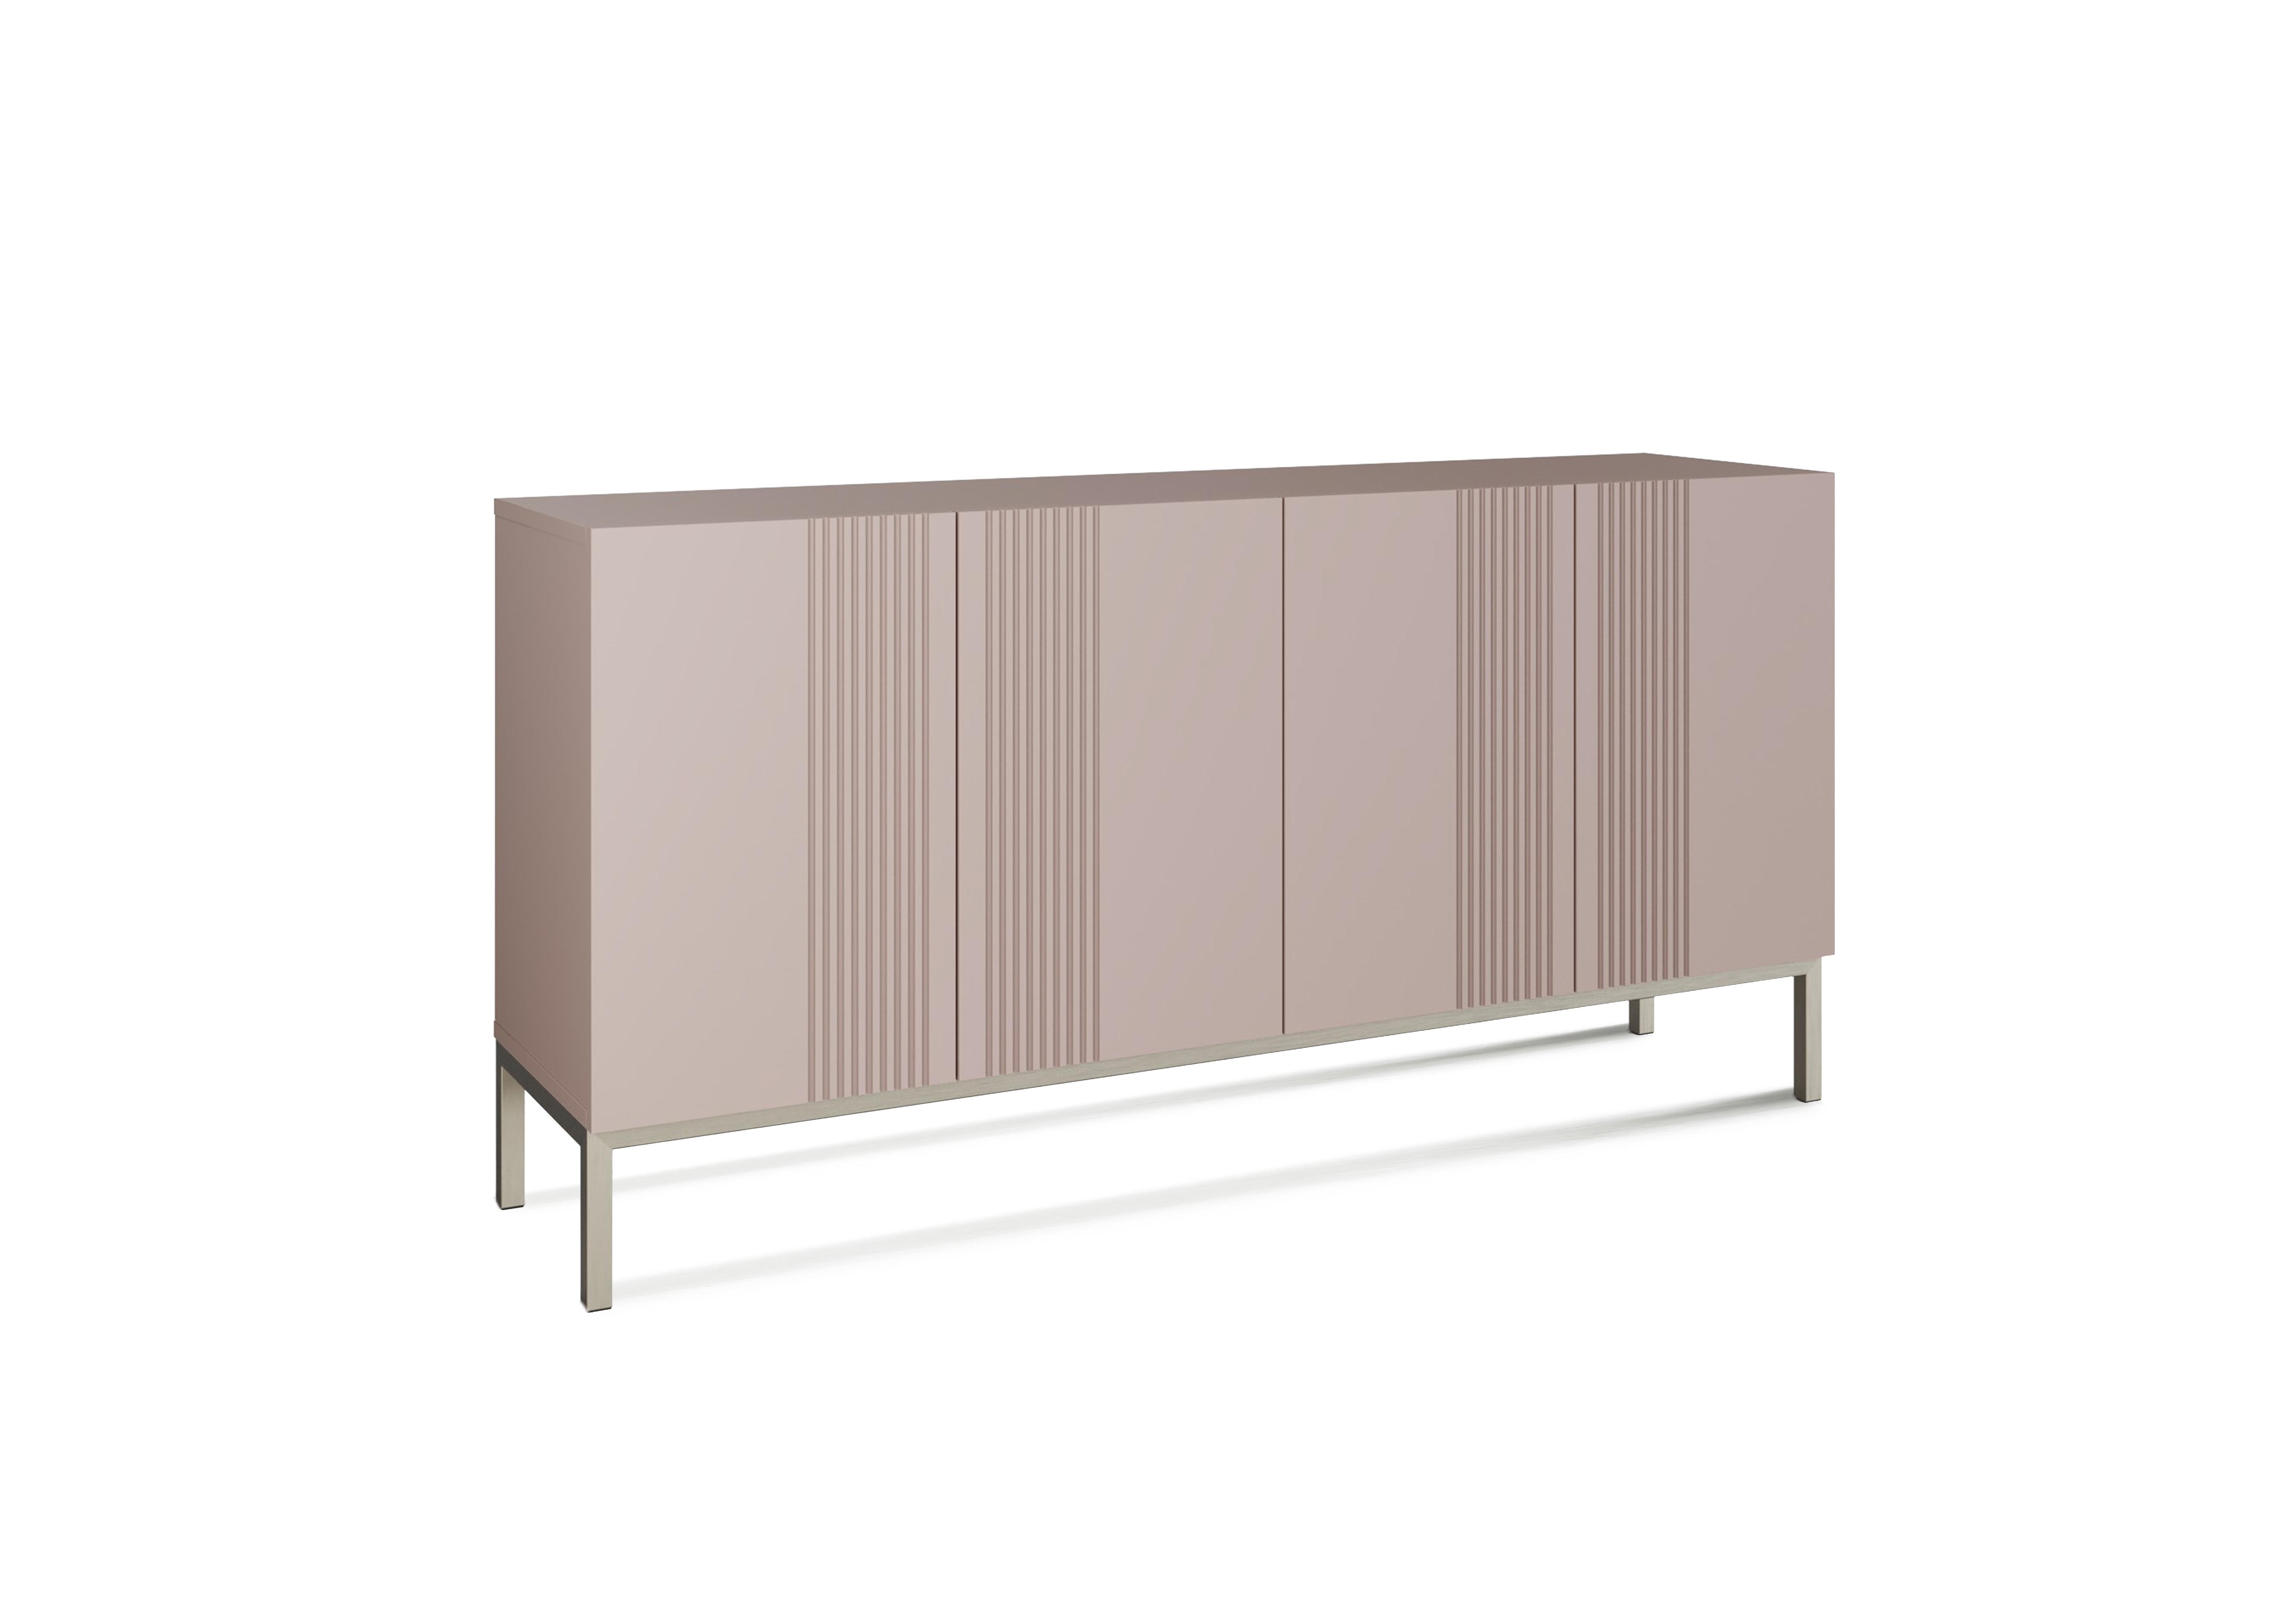 Delta 4 Door Sideboard with Smart LED Lighting in Mulberry on Furniture Village